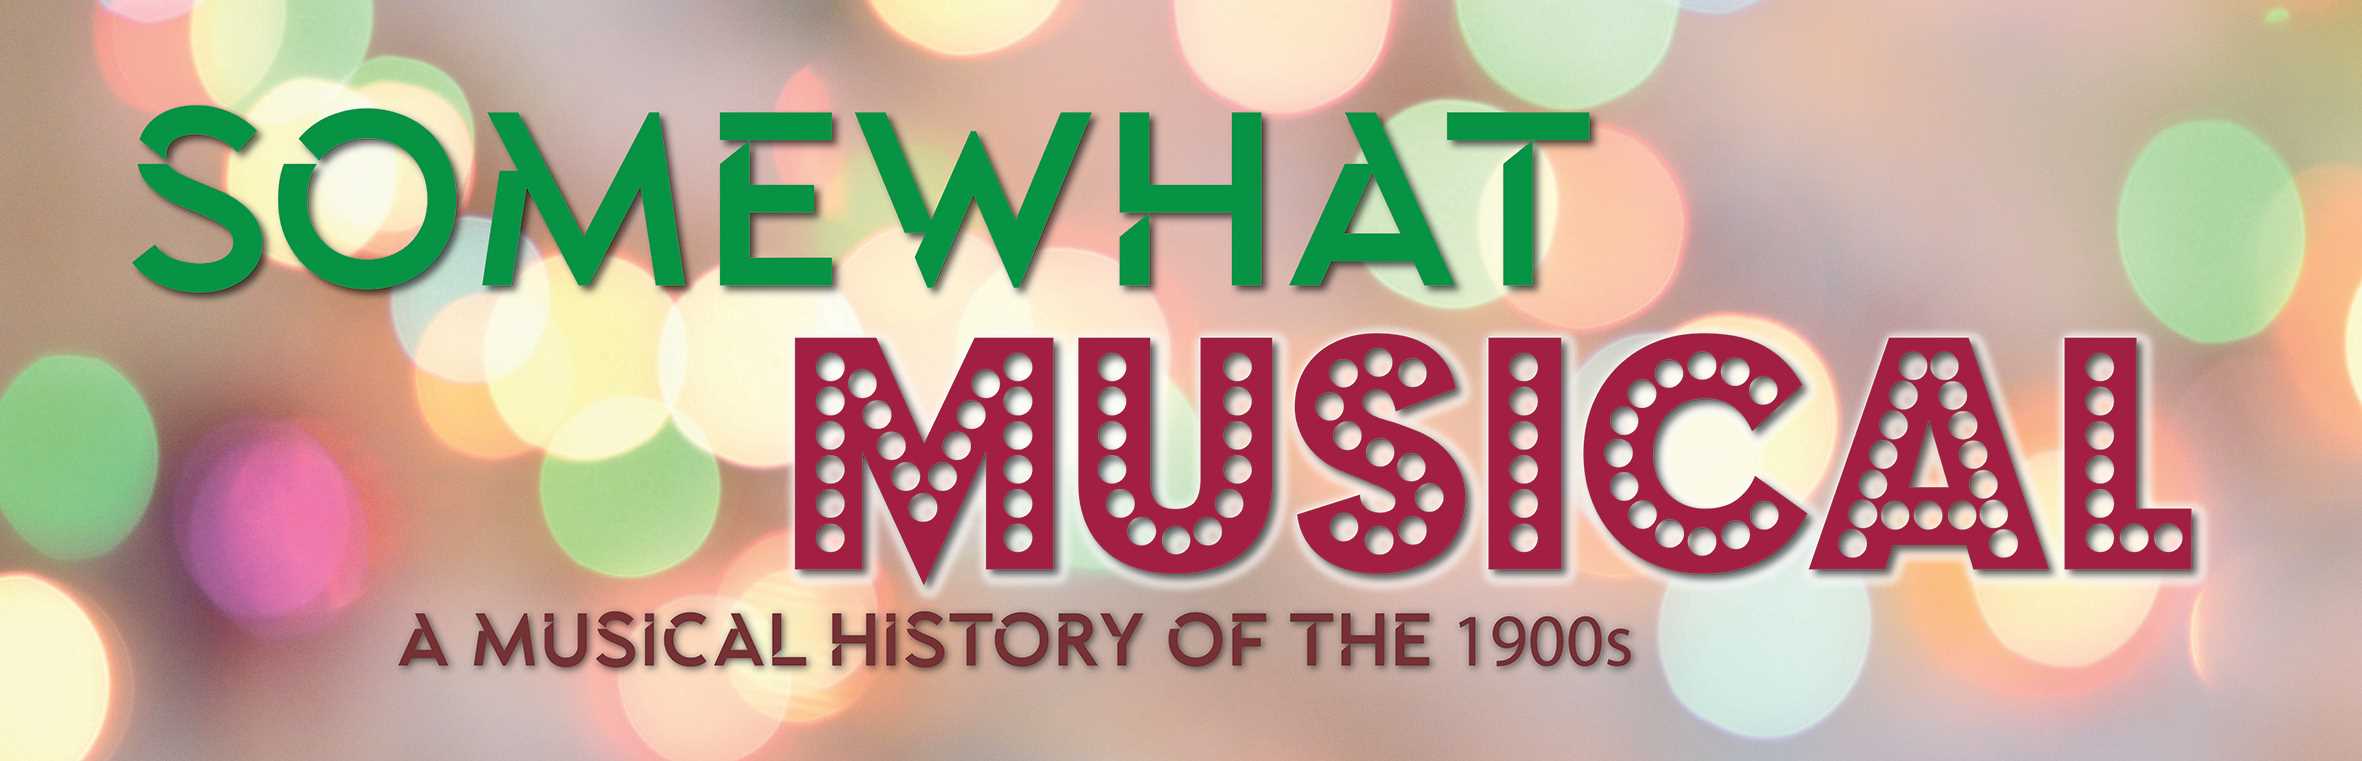 Somewhat Musical - A Musical History of the 1900s' Exhibition